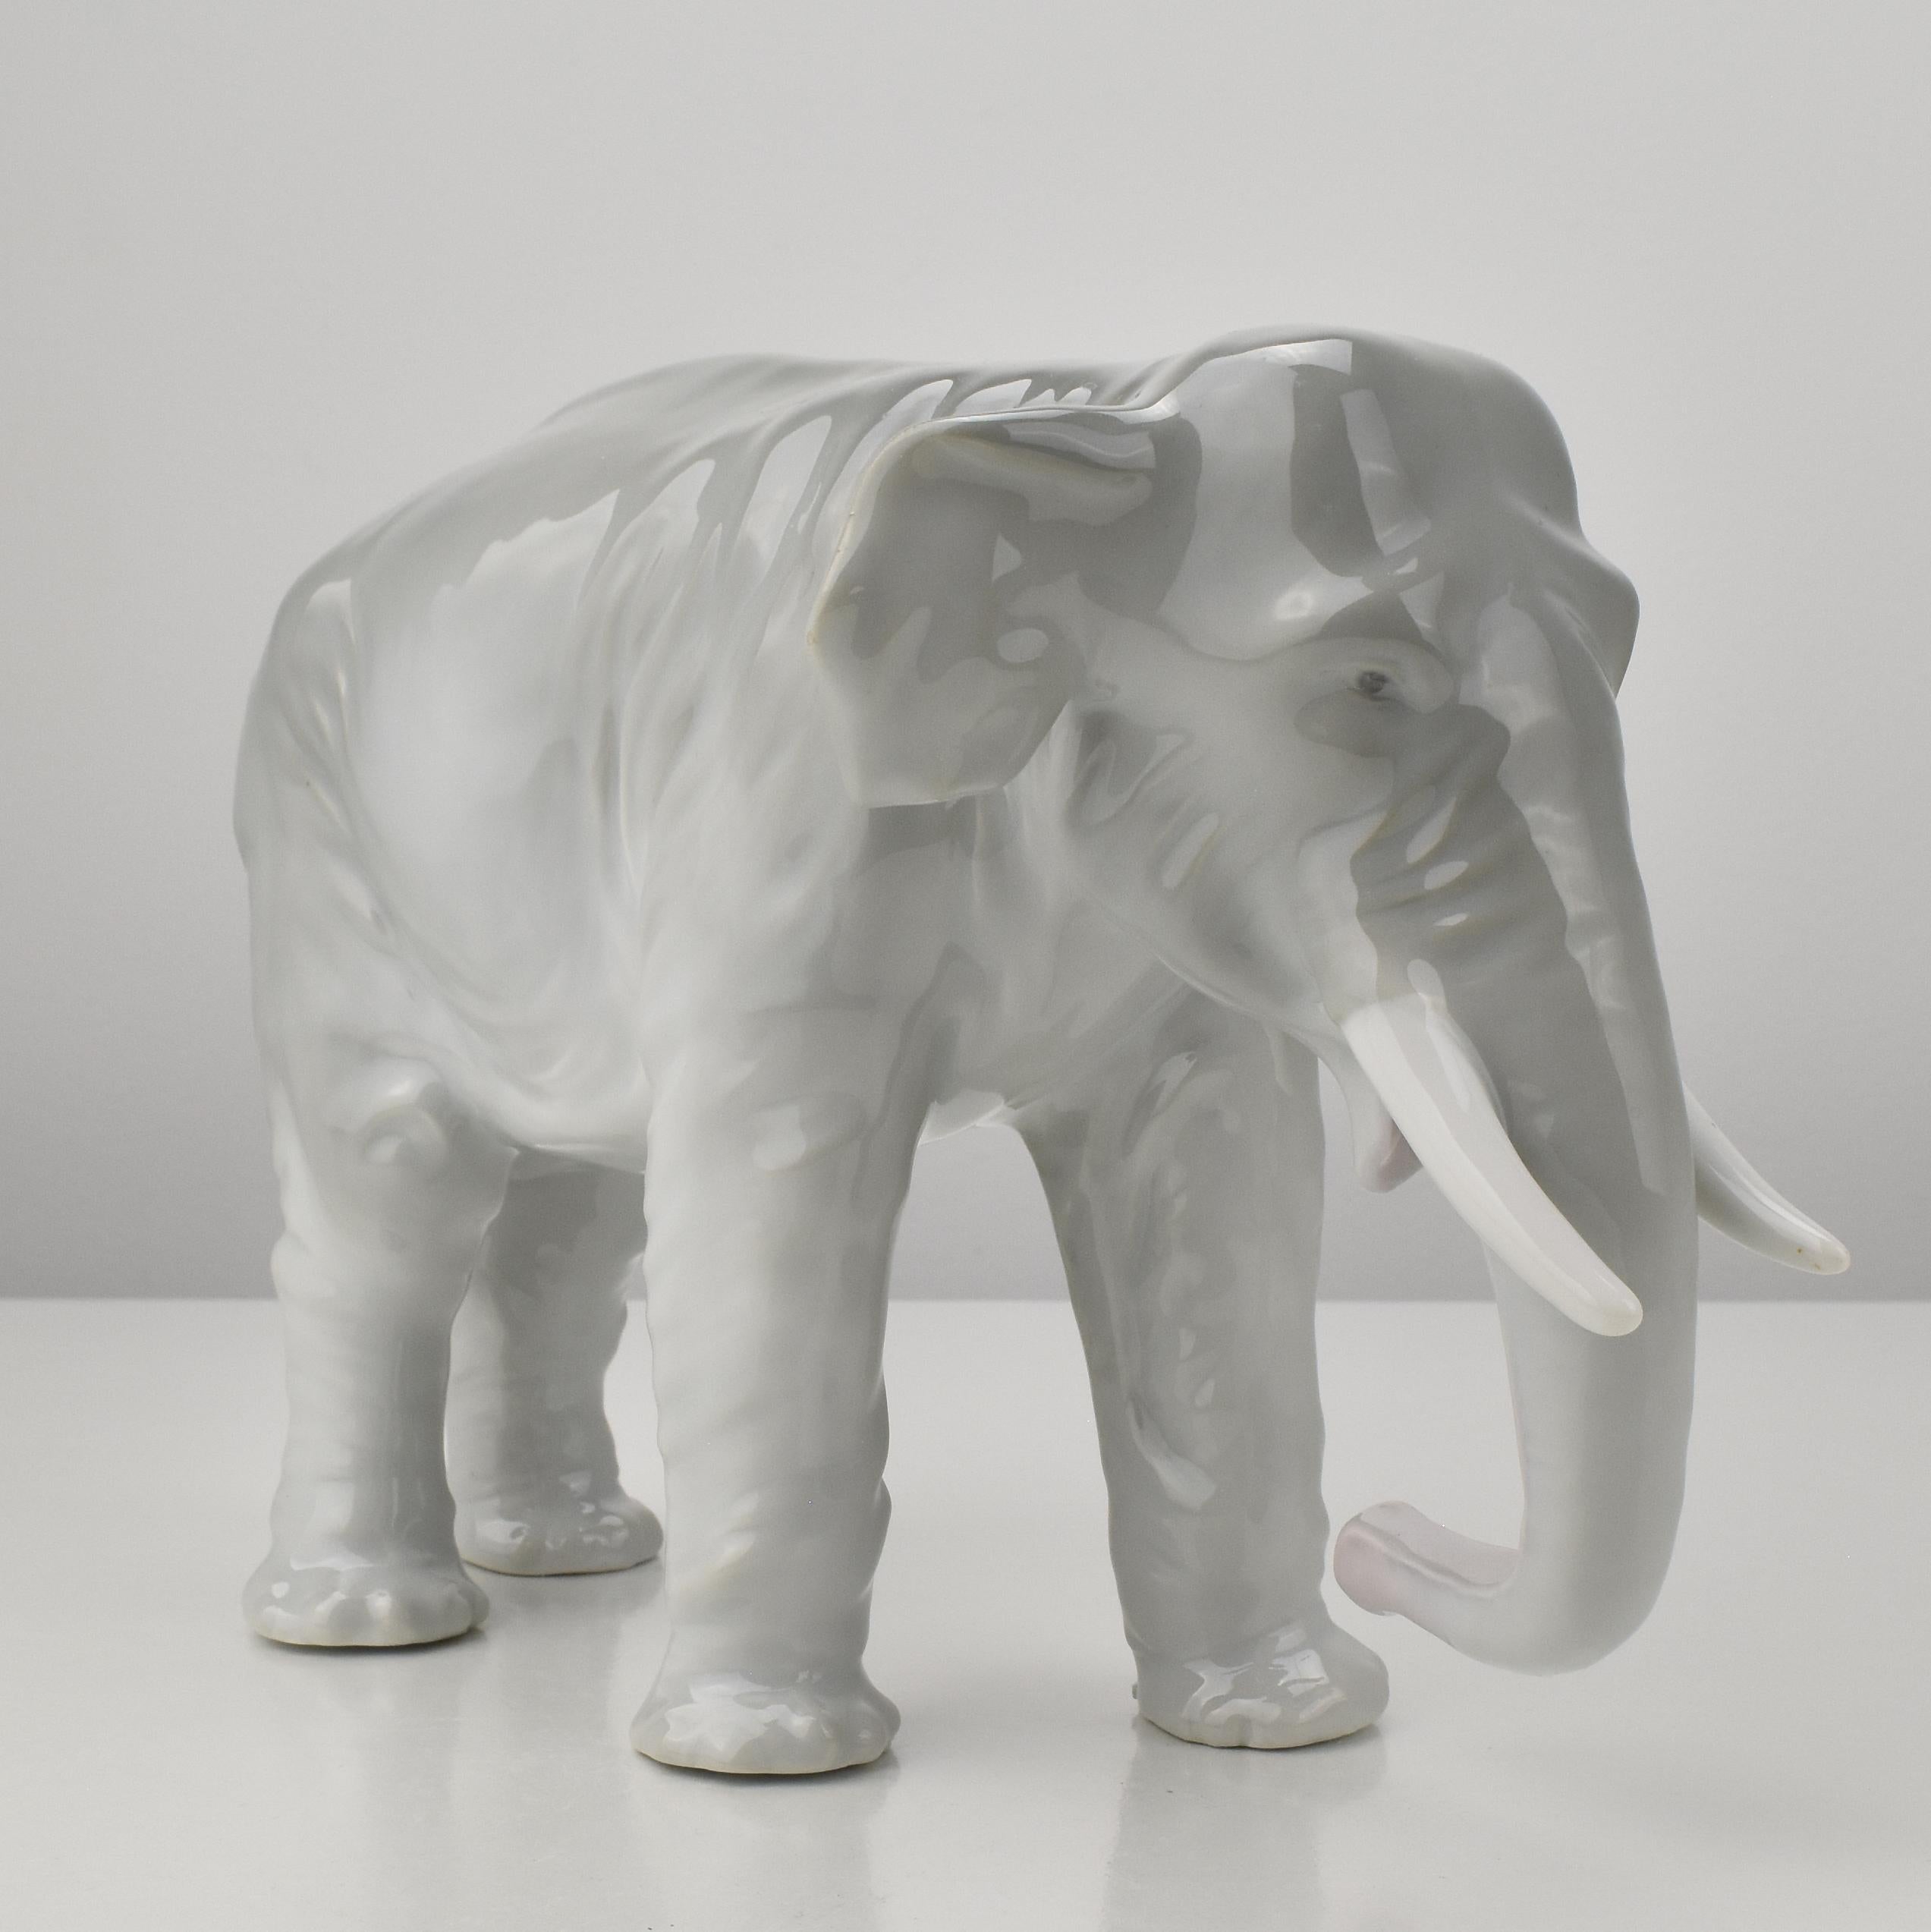 A naturalistic shaped and fine detailed elephant figurine from the Art Nouve era dating to around 1910.
The elephant is marked with a green unidetified manufacturer's mark.